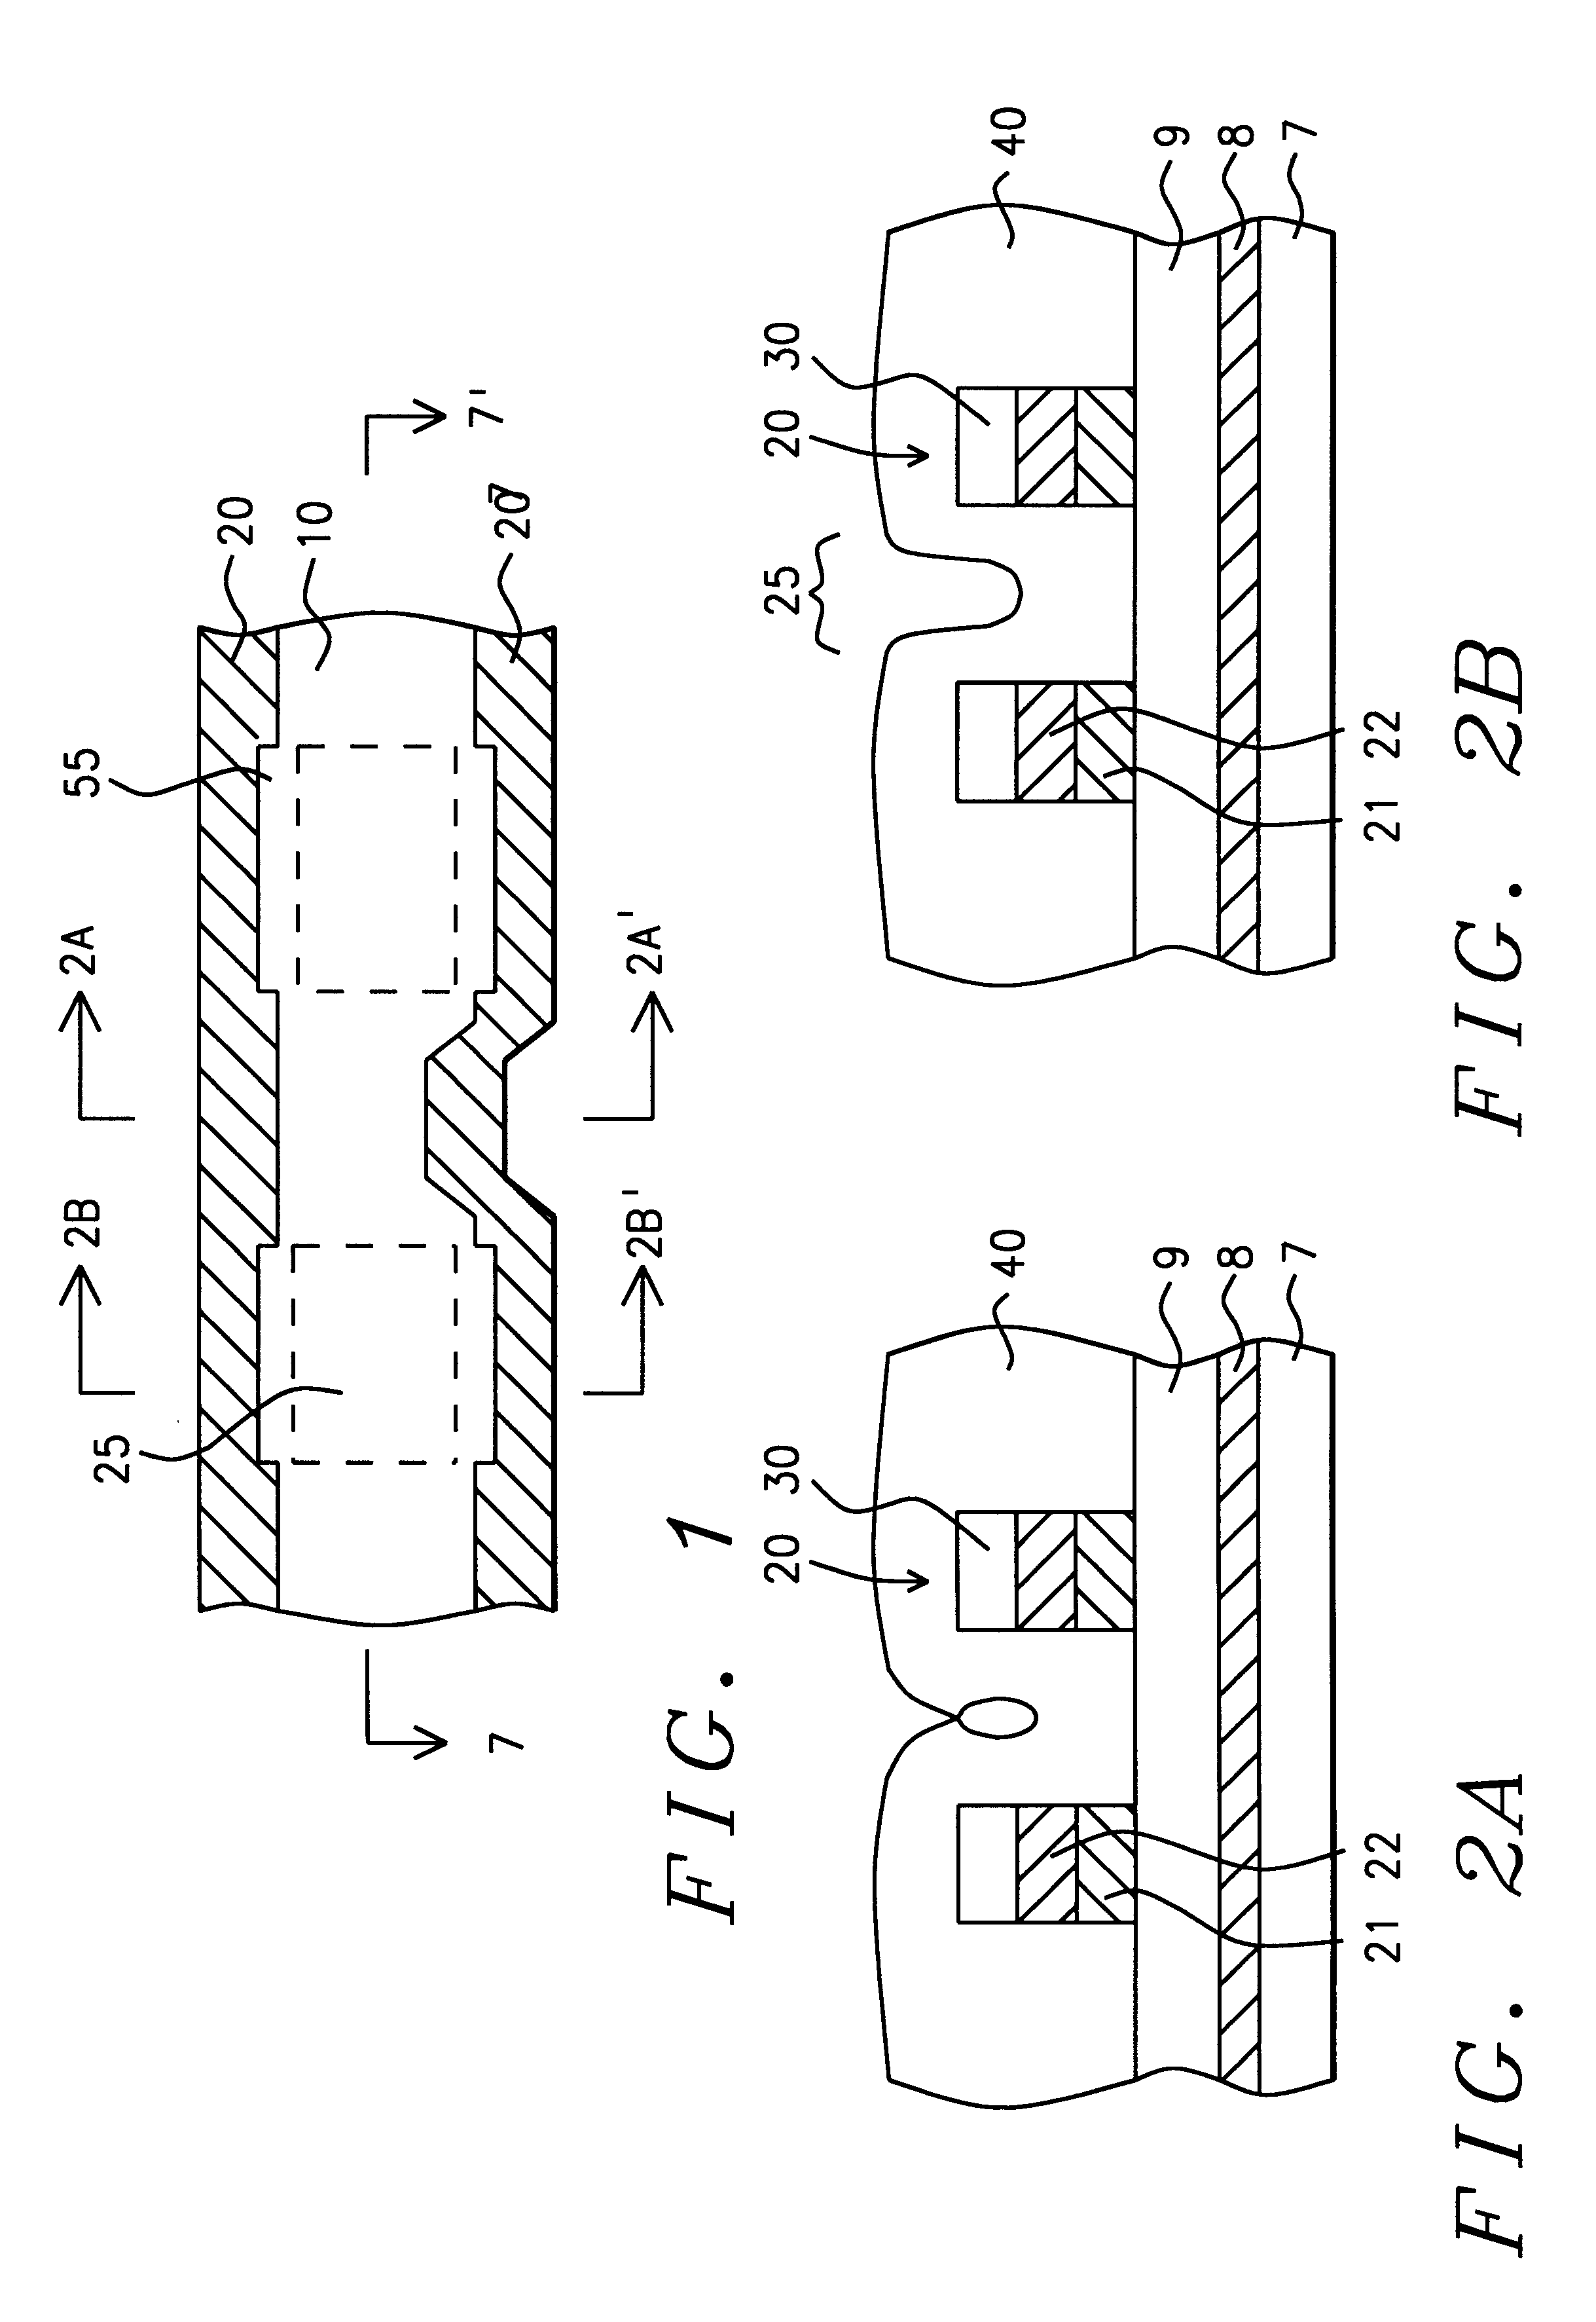 Method for fabricating a self aligned contact which eliminates the key hole problem using a two step spacer deposition